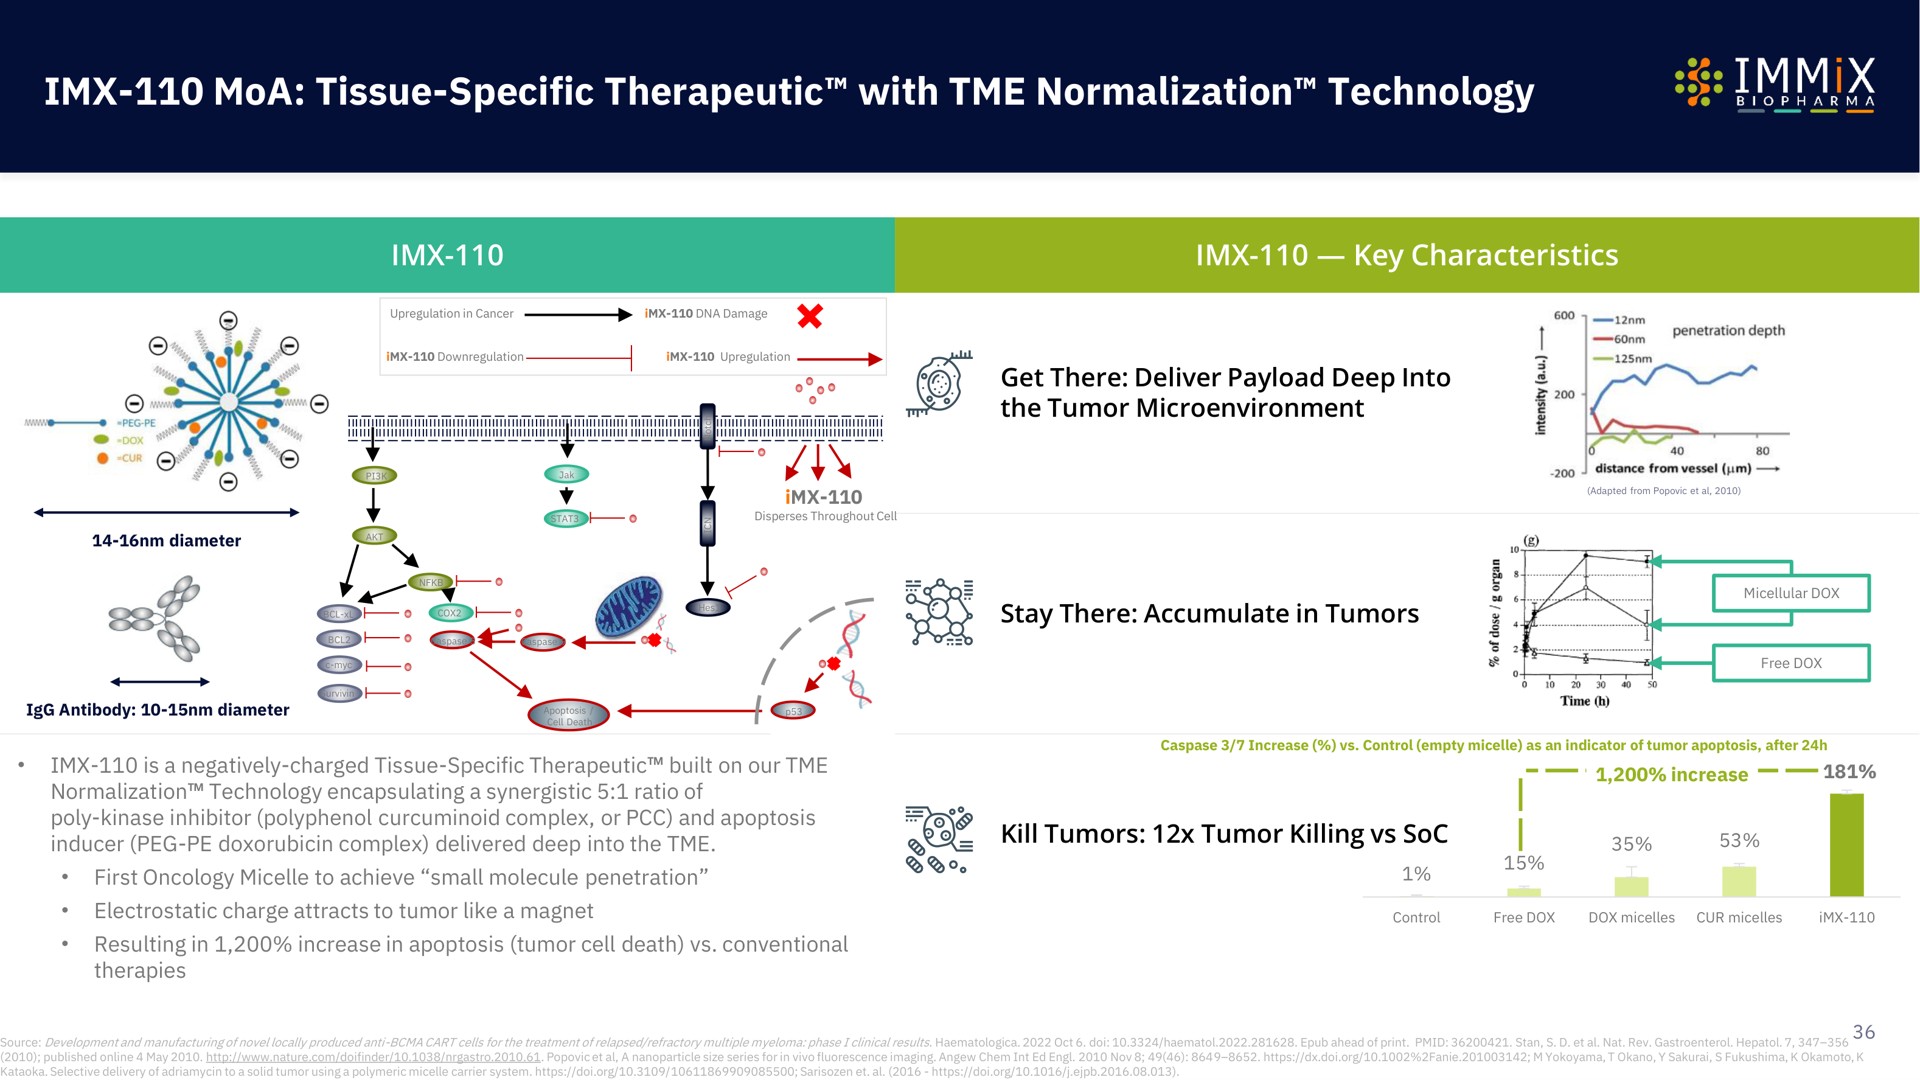 tissue specific therapeutic with normalization technology | Immix Biopharma